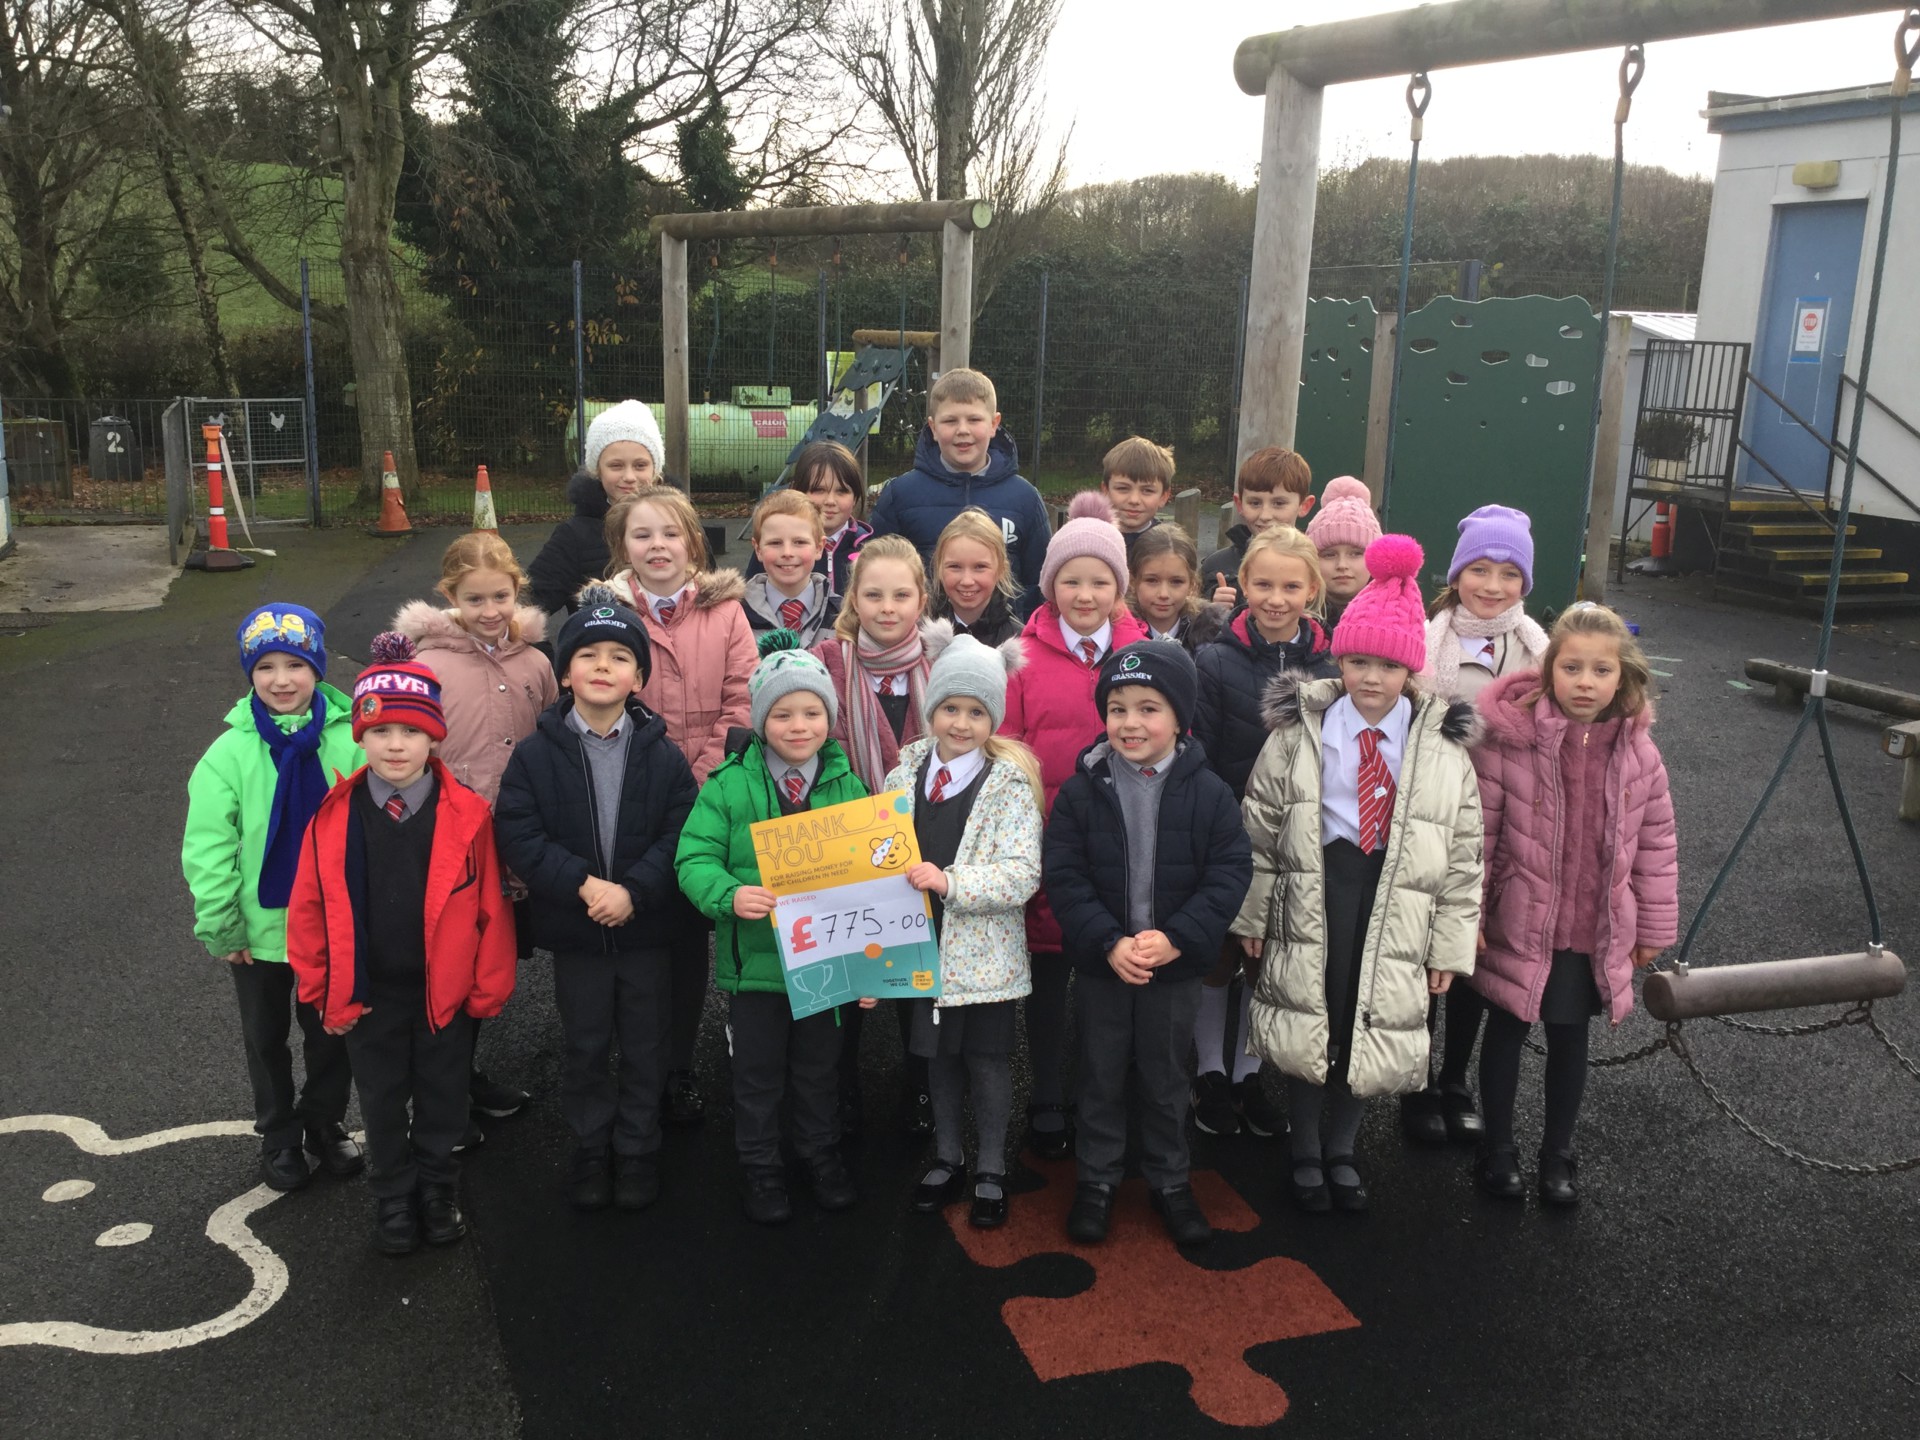 Pupils go the extra mile for charity